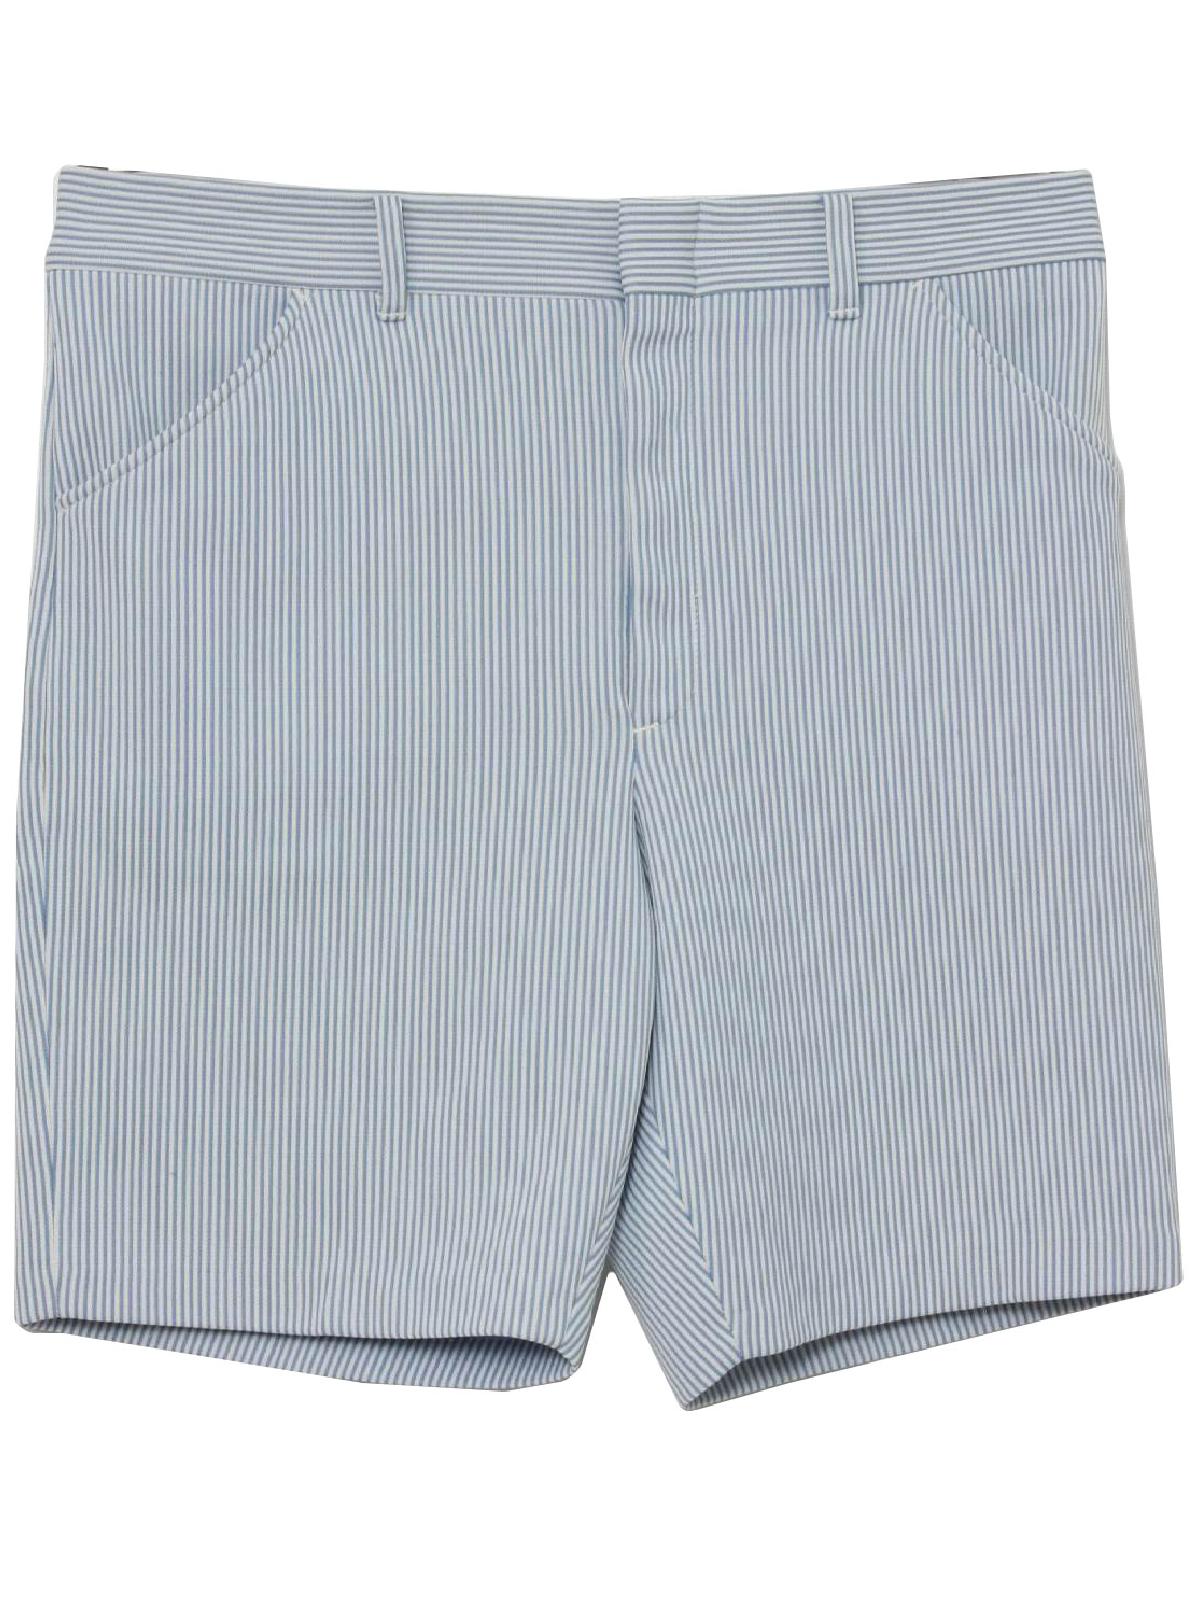 70's Vintage Shorts: 70s -Haband- Mens off white and light blue ...